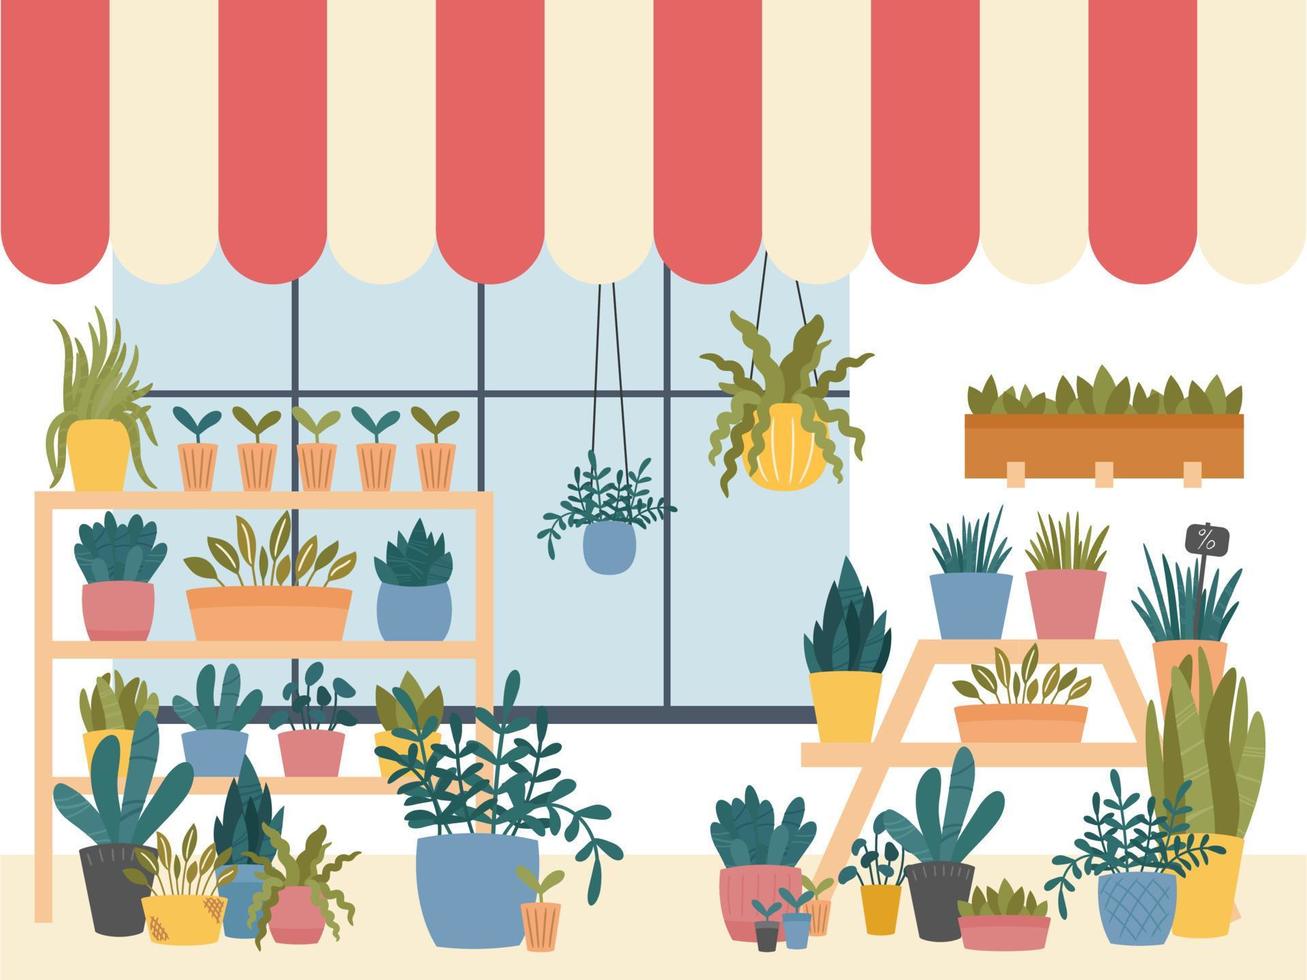 Flower shop interior with various indoor plants in pots, planters and boxes,standing on shelves and stands, with window striped shed.Cute Scandinavian Hygge style.Vector illustration, dark background vector